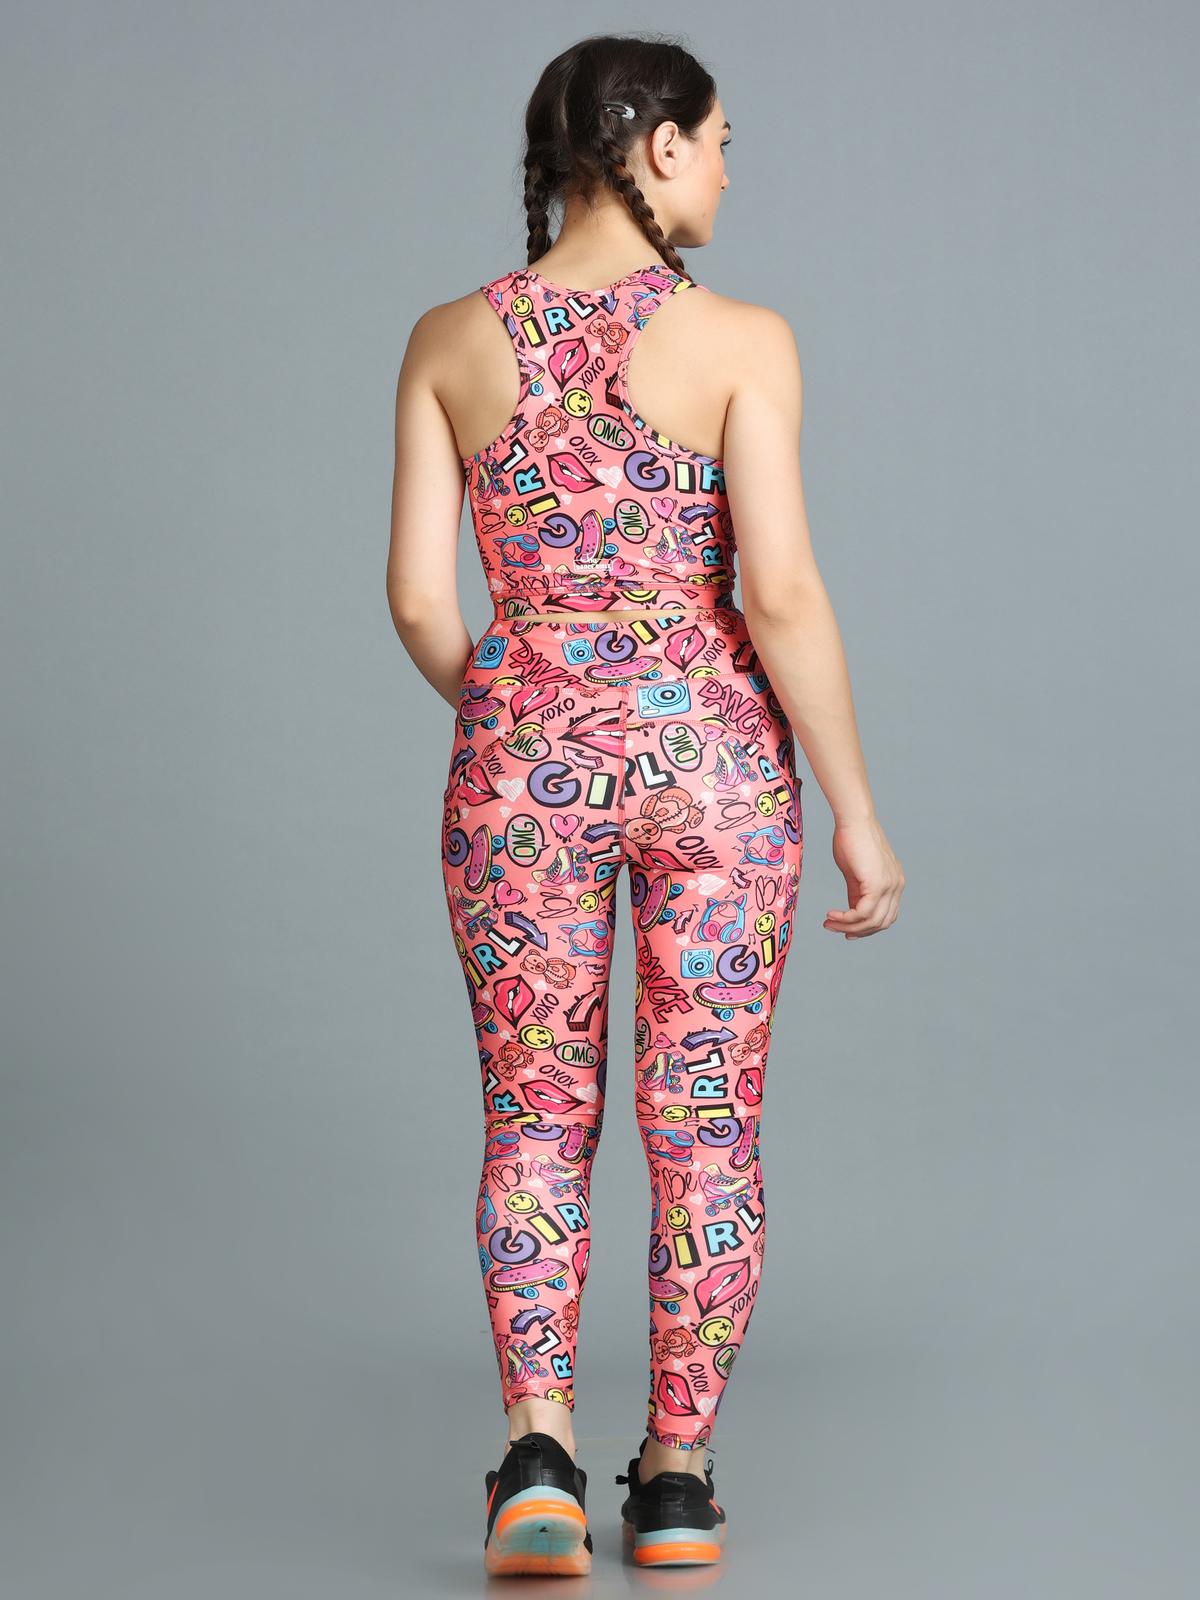 Stylish Printed Co-ord Activewear Leggings and Padded Sports Top Set - Eva